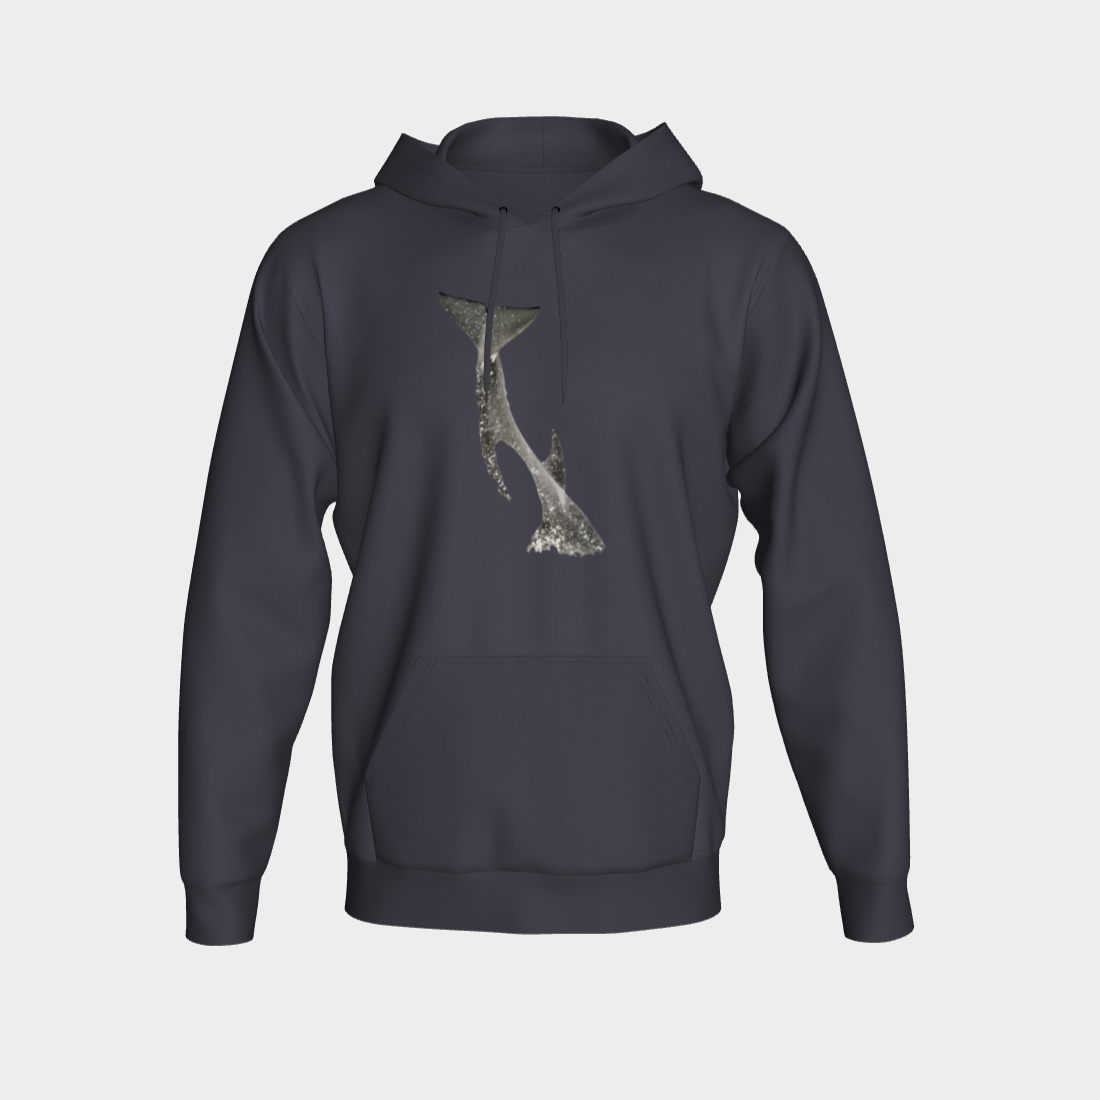 Orca Breach Unisex Pullover Hoodie Your Van Isle Goddess unisex pullover hoodie is a great classic hoodie!  Created with state of the art tri-tex material which is a non-shrink poly middle encased in two layers of ultra soft cotton face and lining.